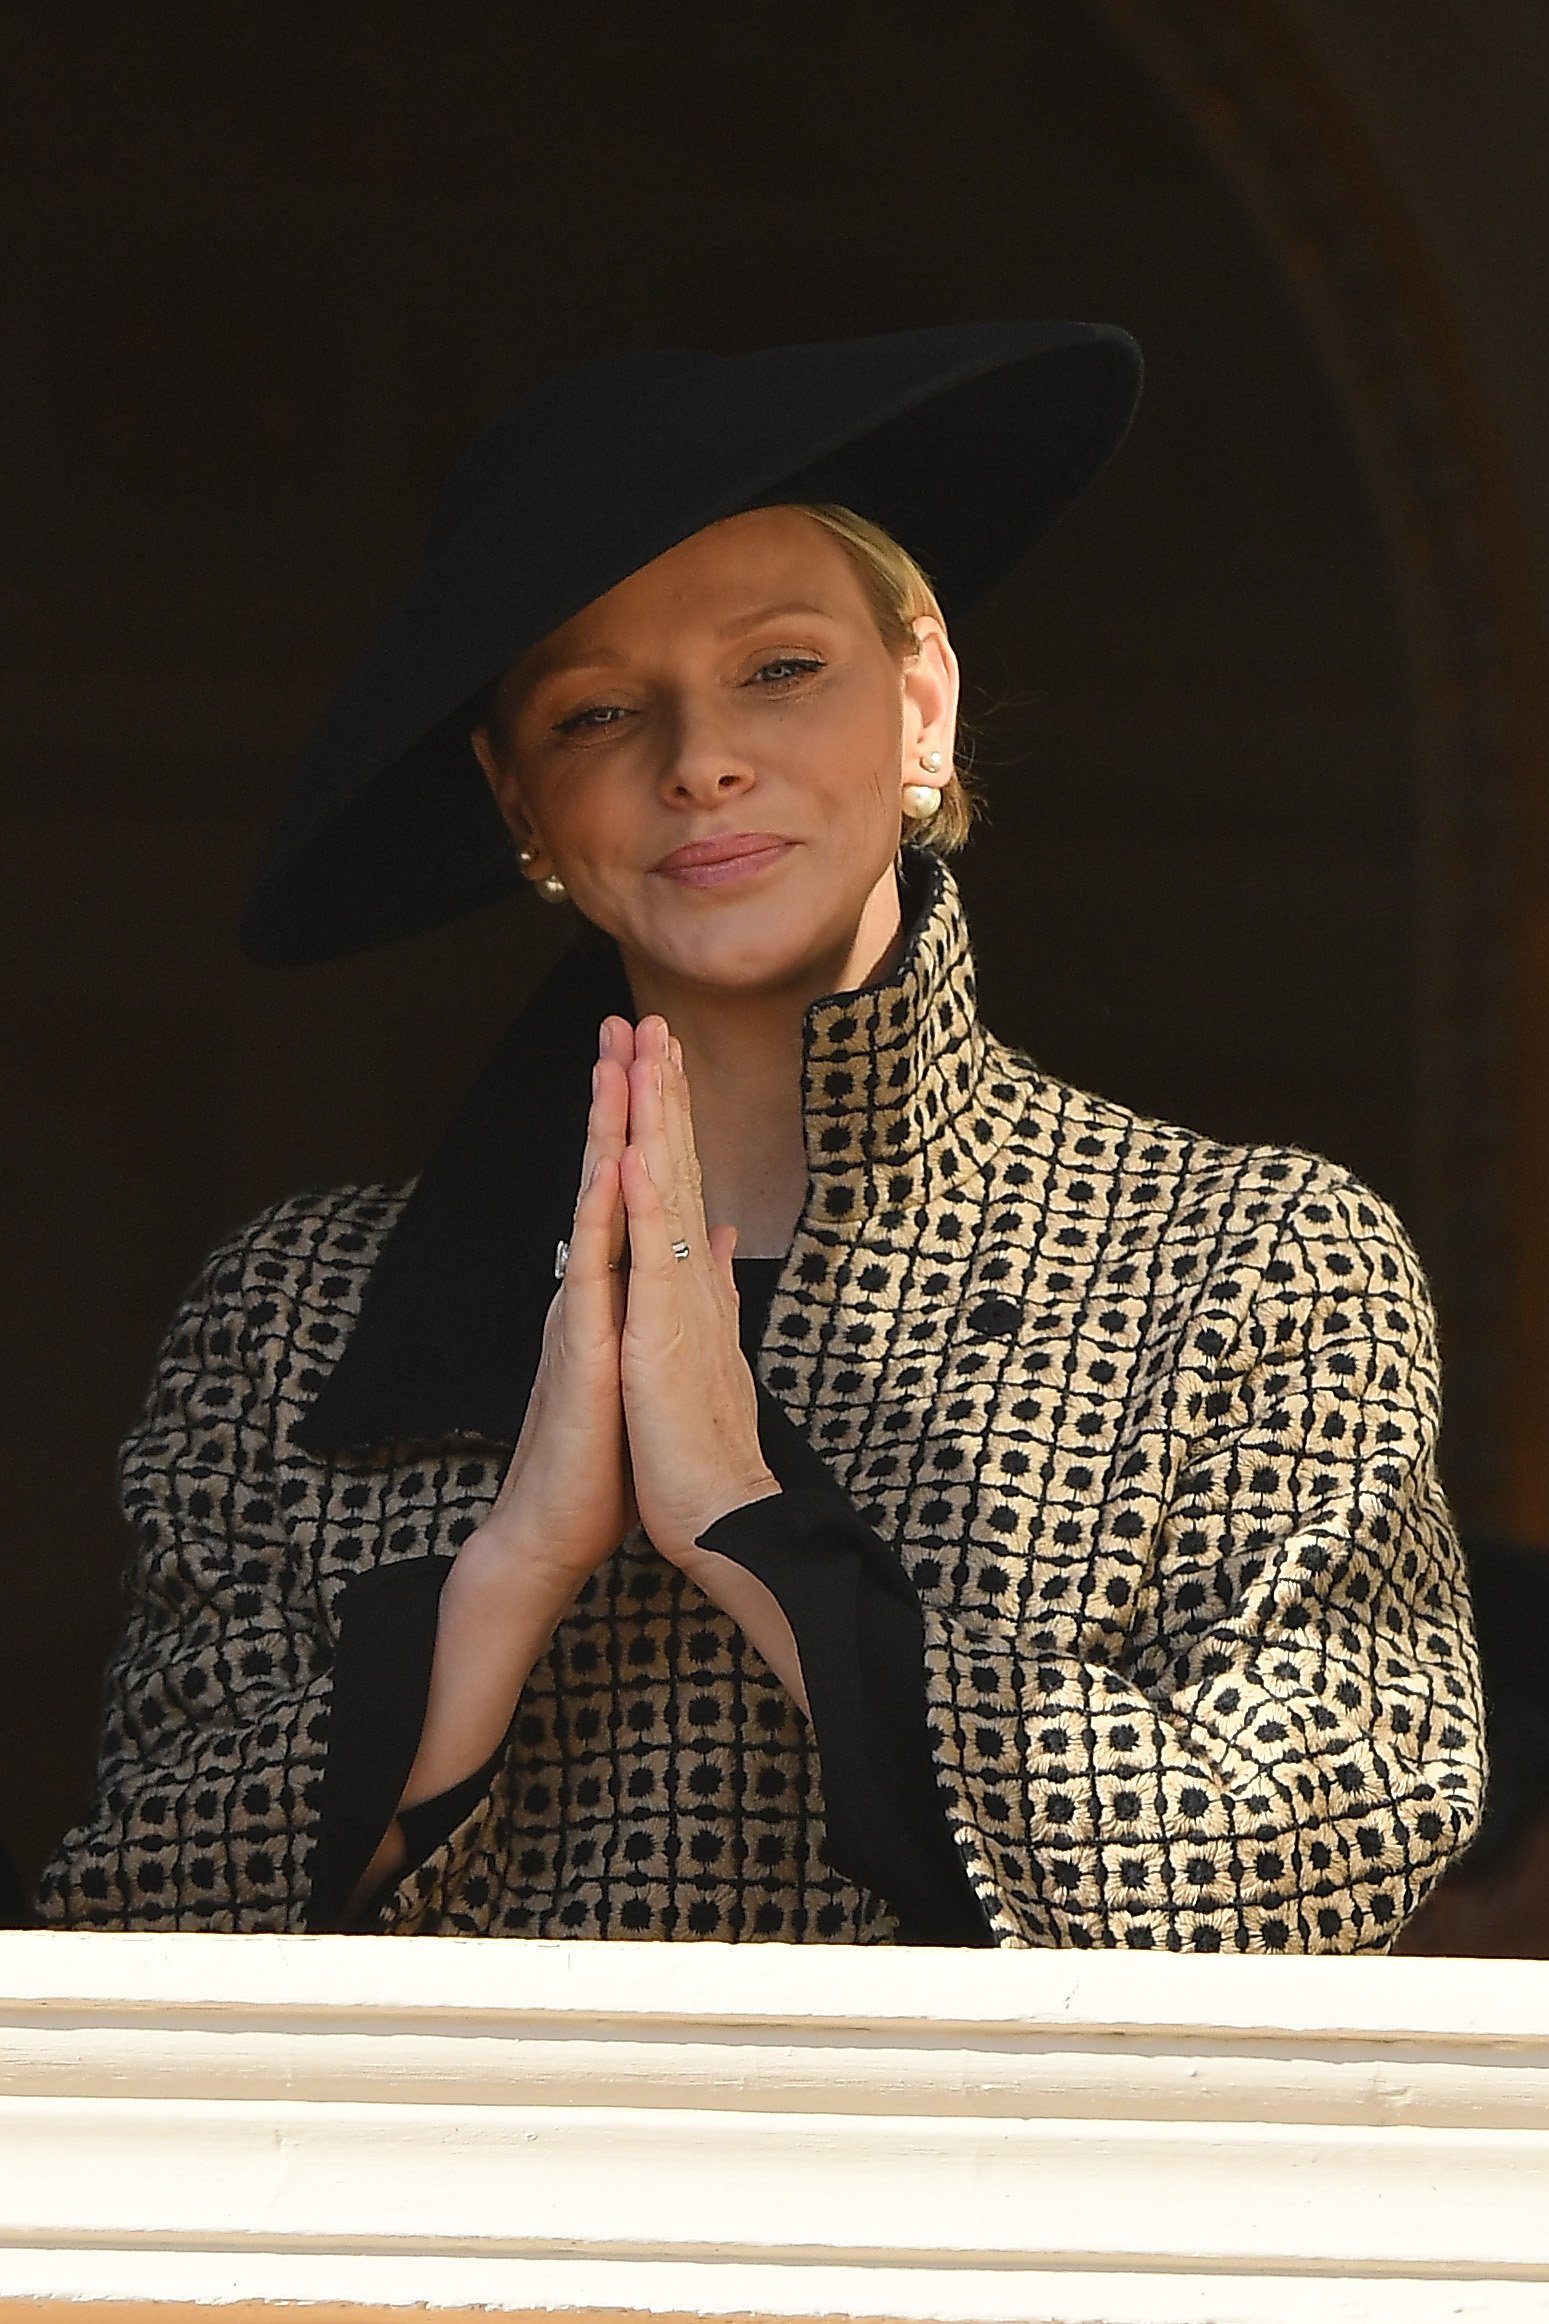 Princess Charlene attending the Monaco National day parade on November 19, 2018 in Monte-Carlo, Monaco. / Source: Getty Images